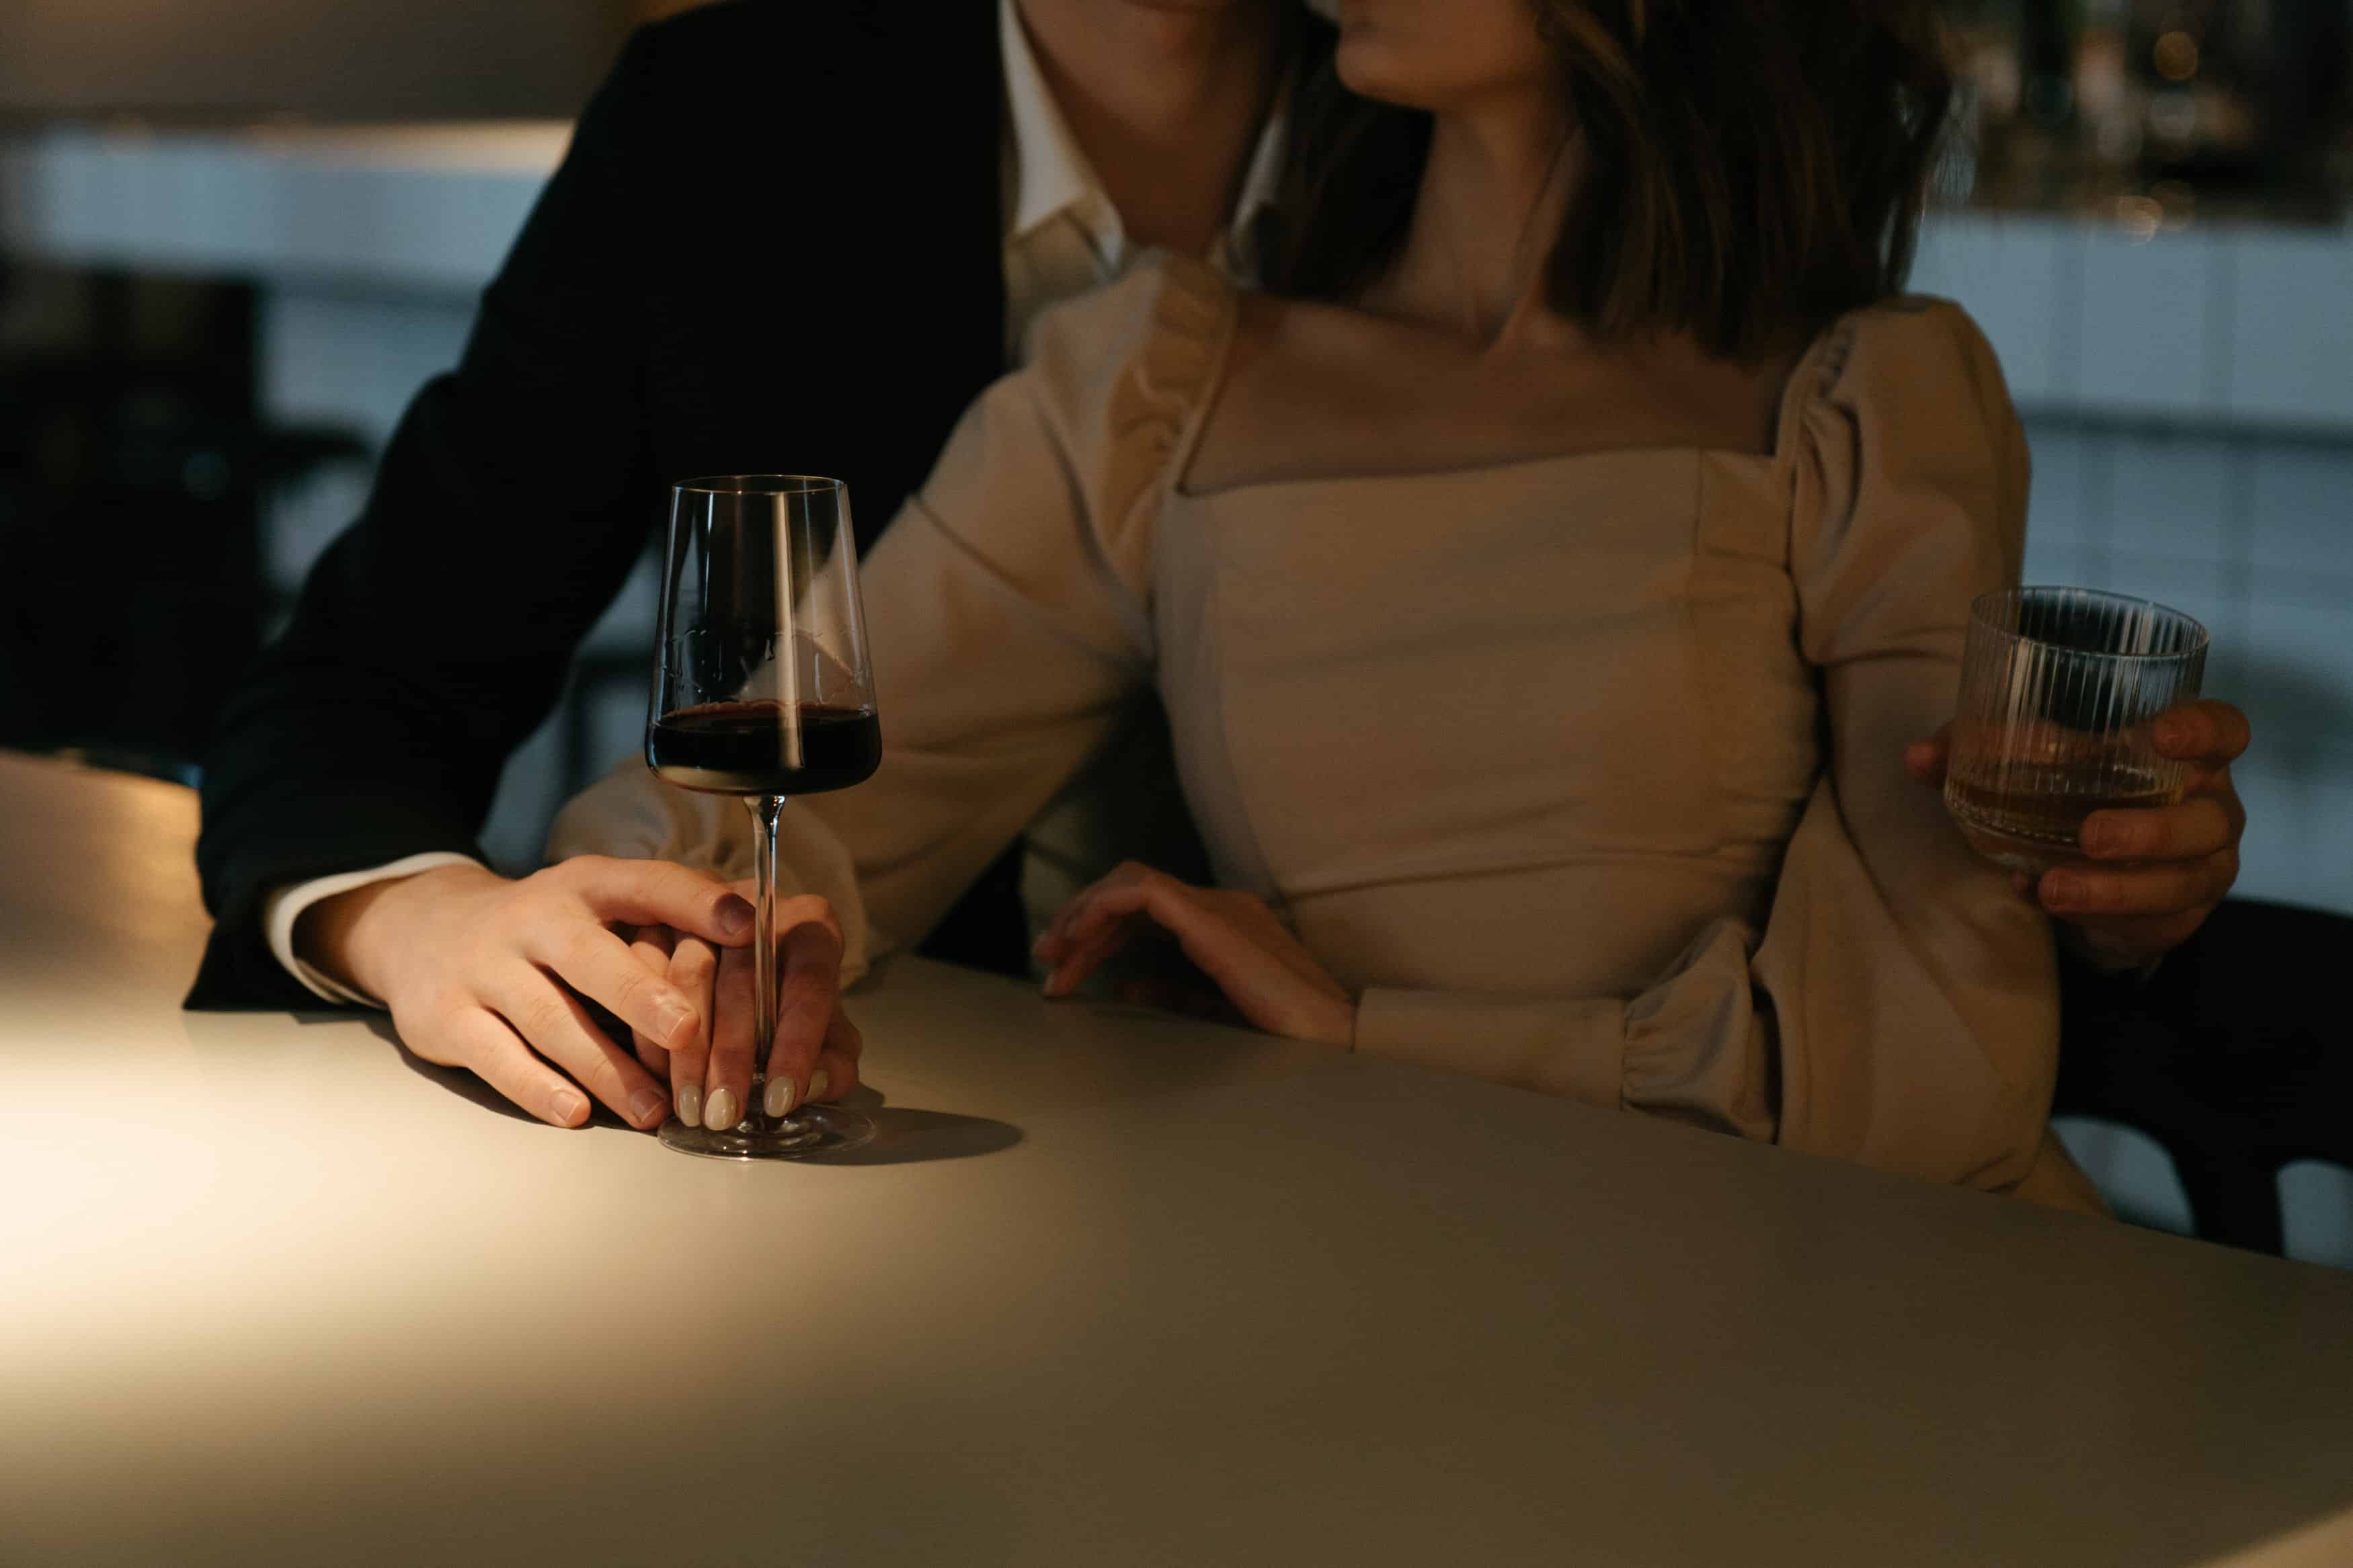 well dressed couple on a date drinking wine